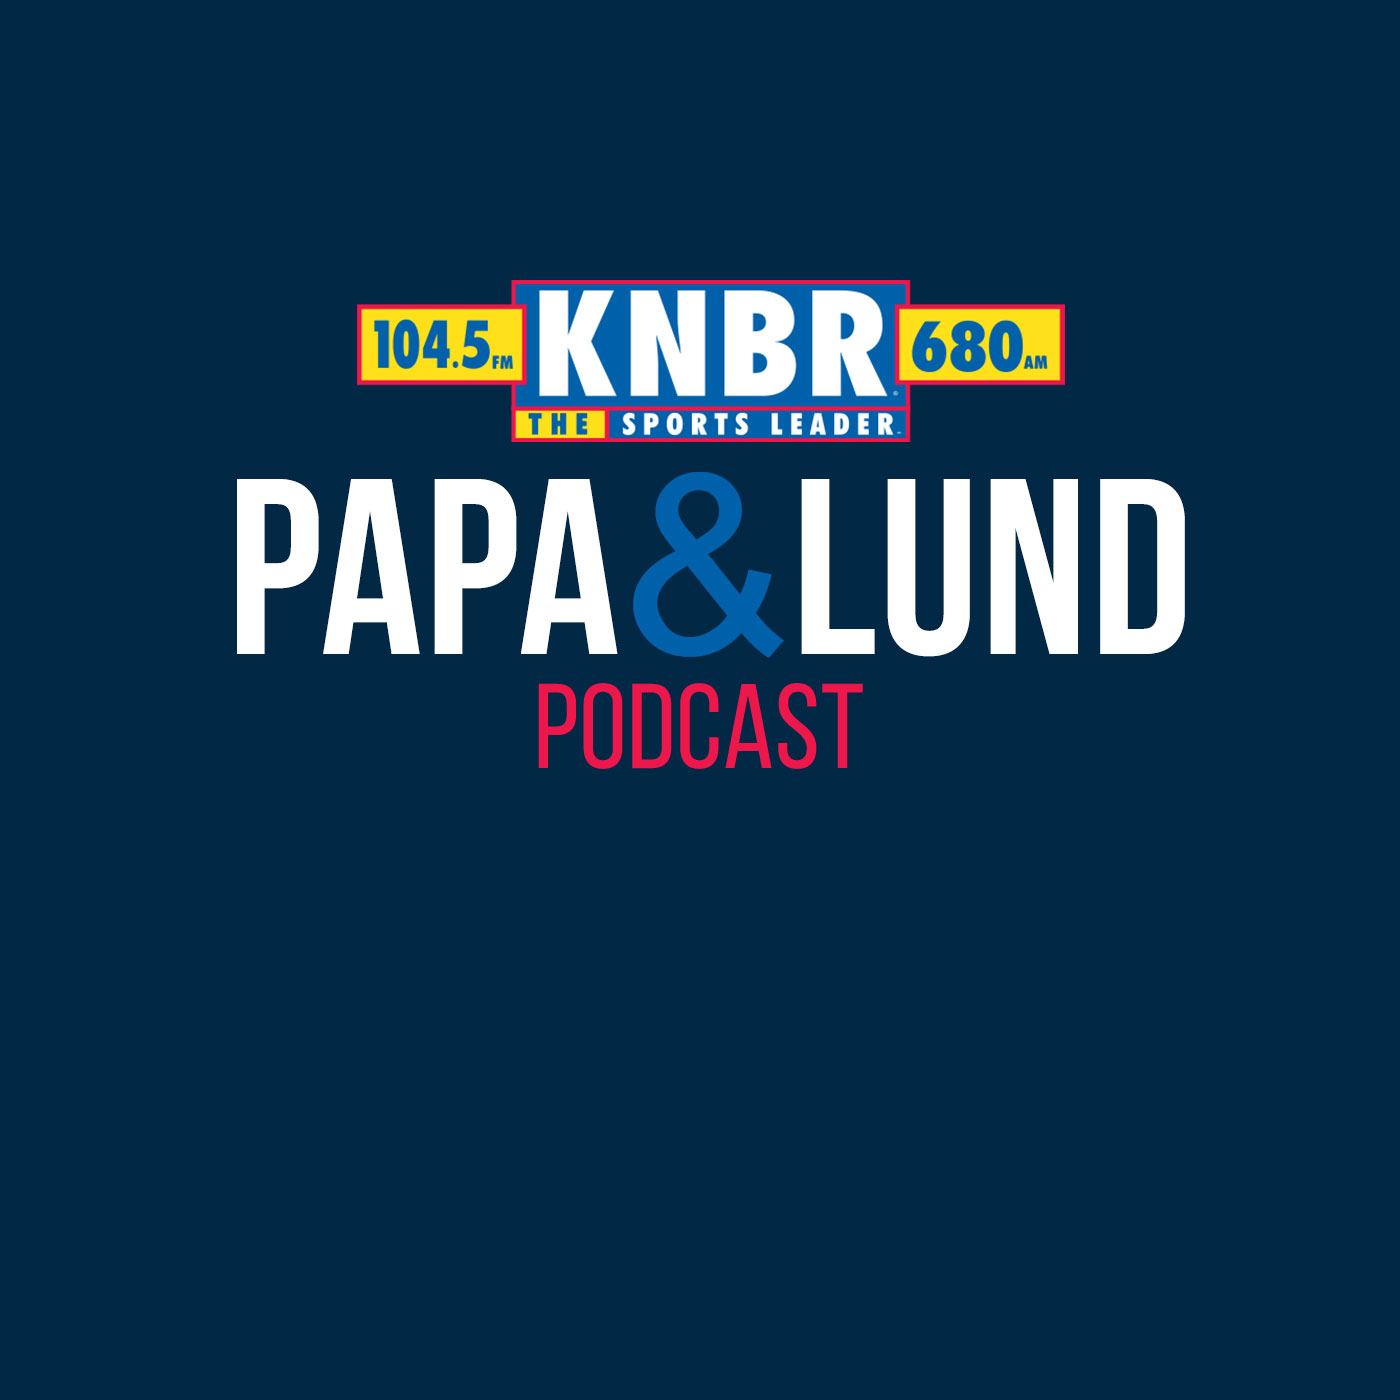 4-5 Hour 1: Papa & Lund are live from the on deck circle at Oracle park where they converse with Marty Lurie, Jake Peavy, and Tim Flannery